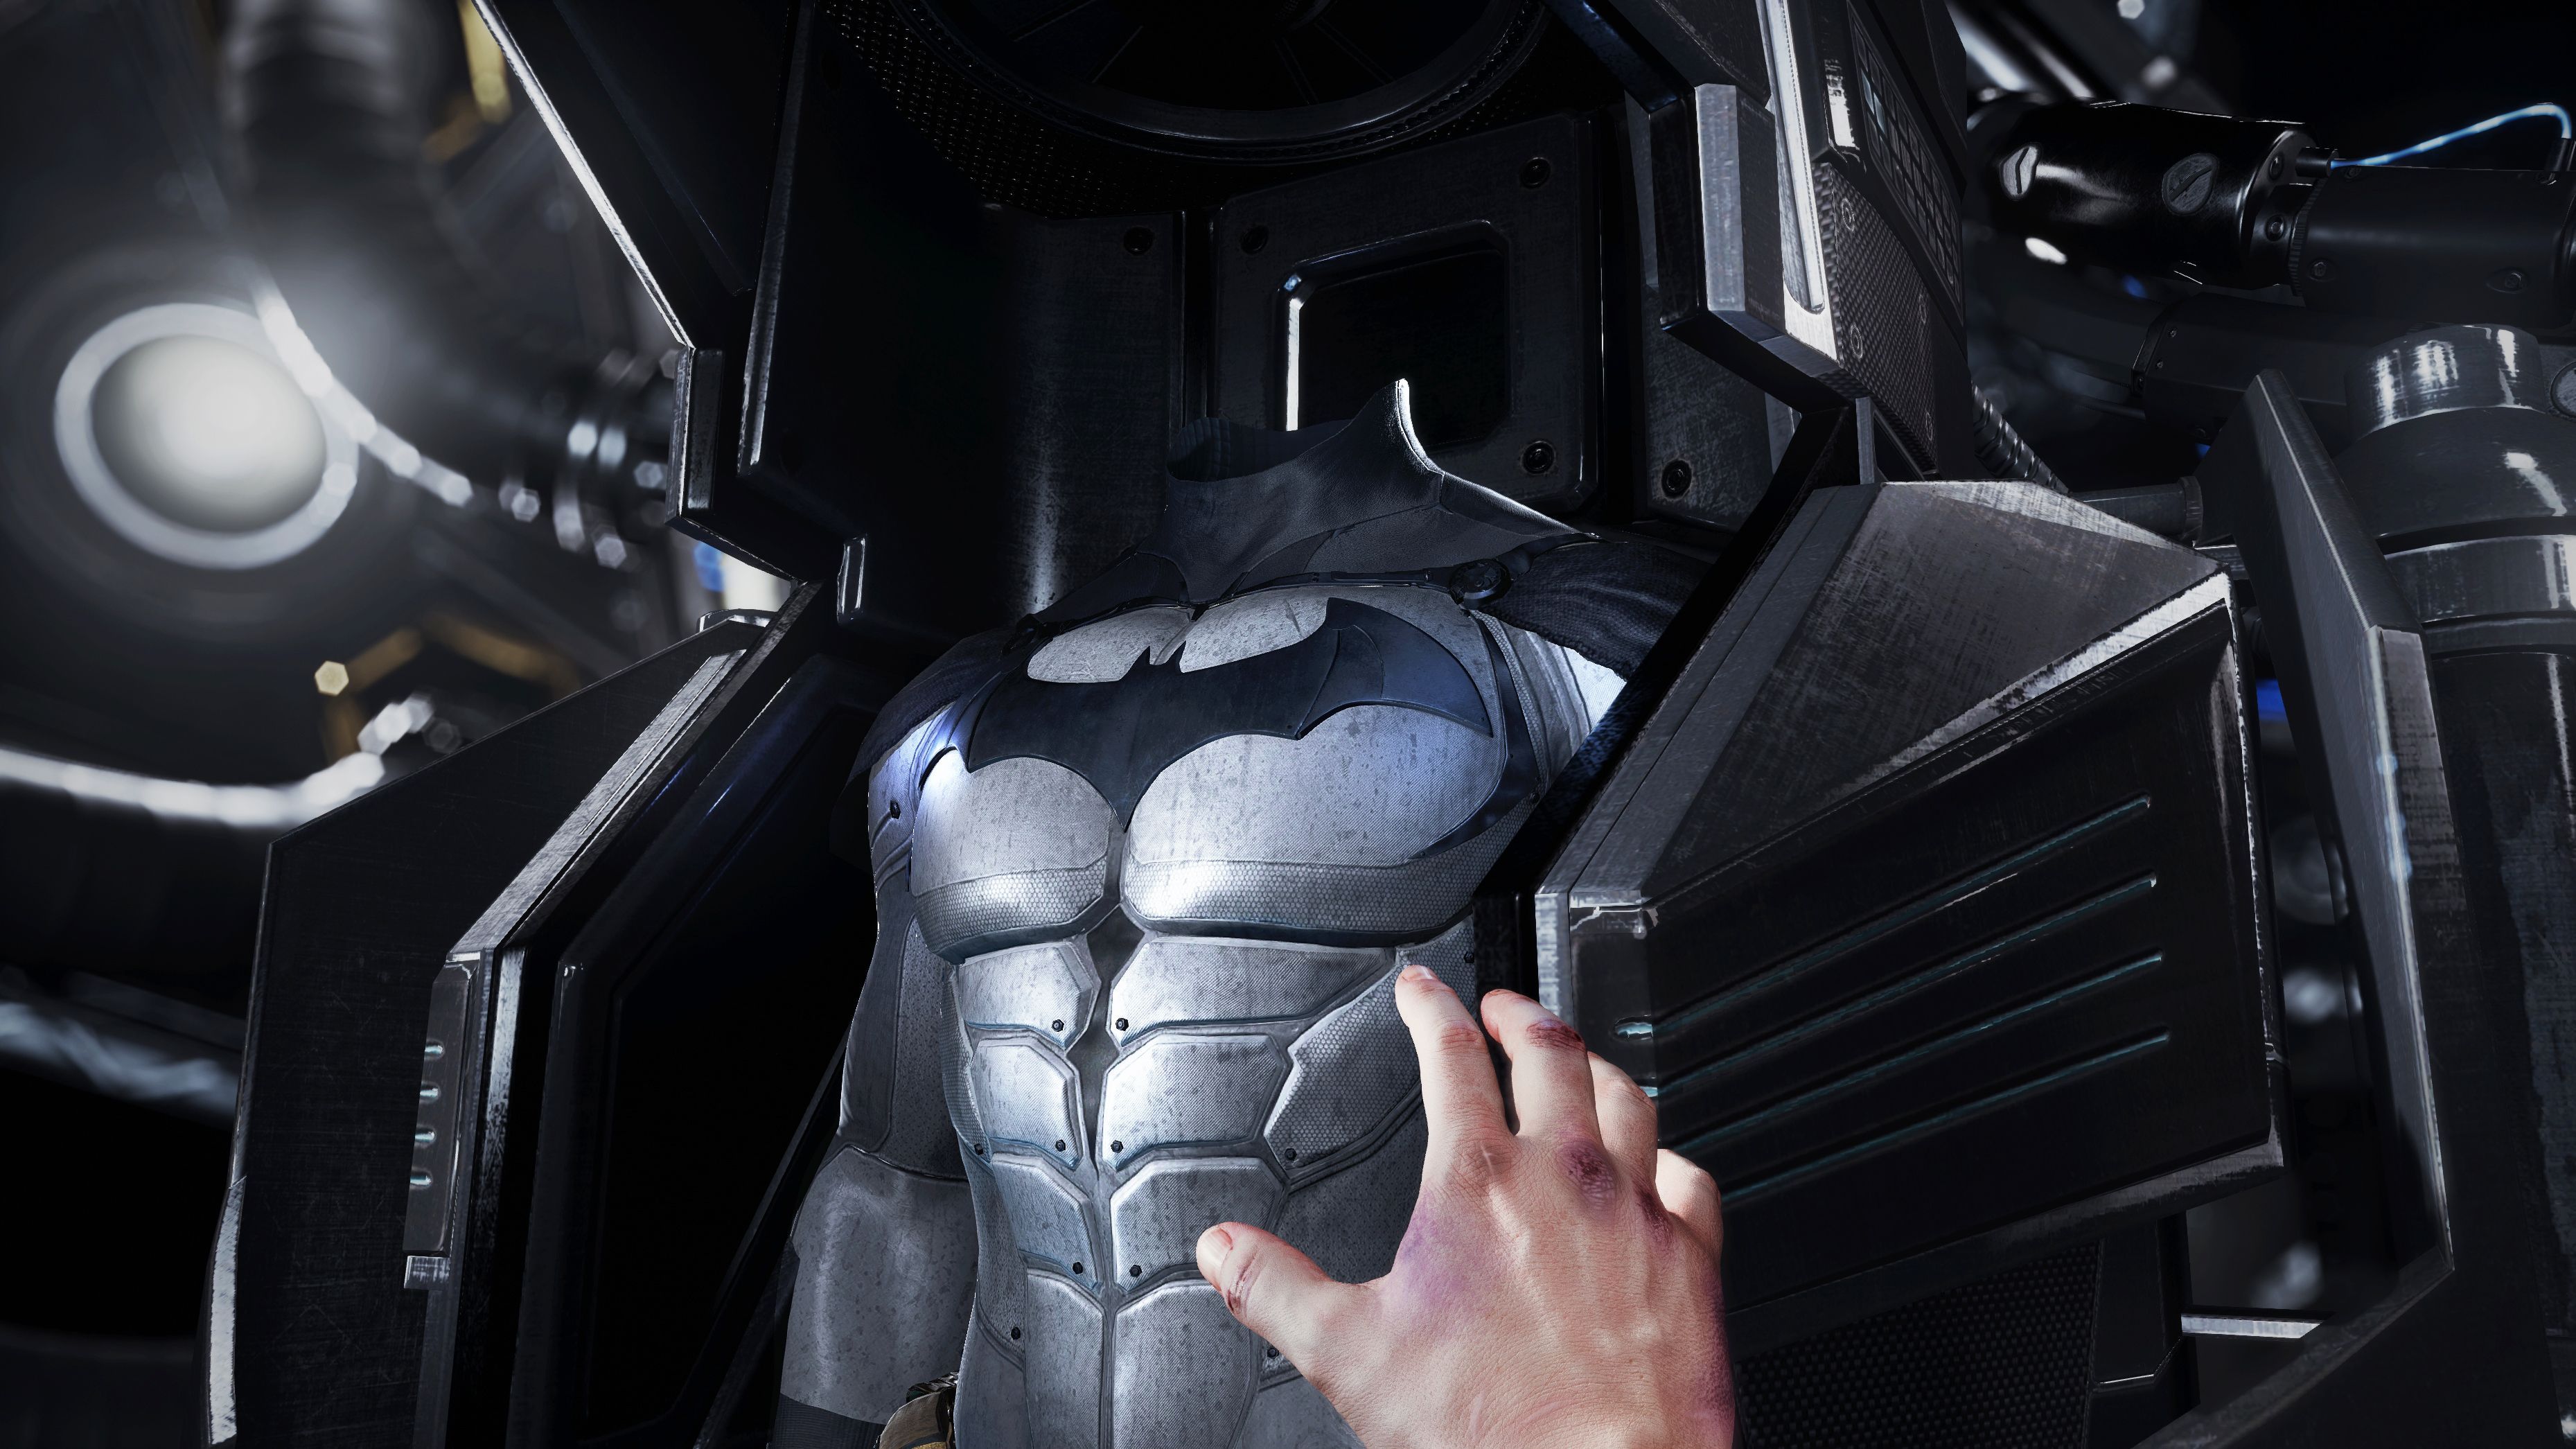 Ranking The Best Batman Games Of All Time - Green Man Gaming Blog